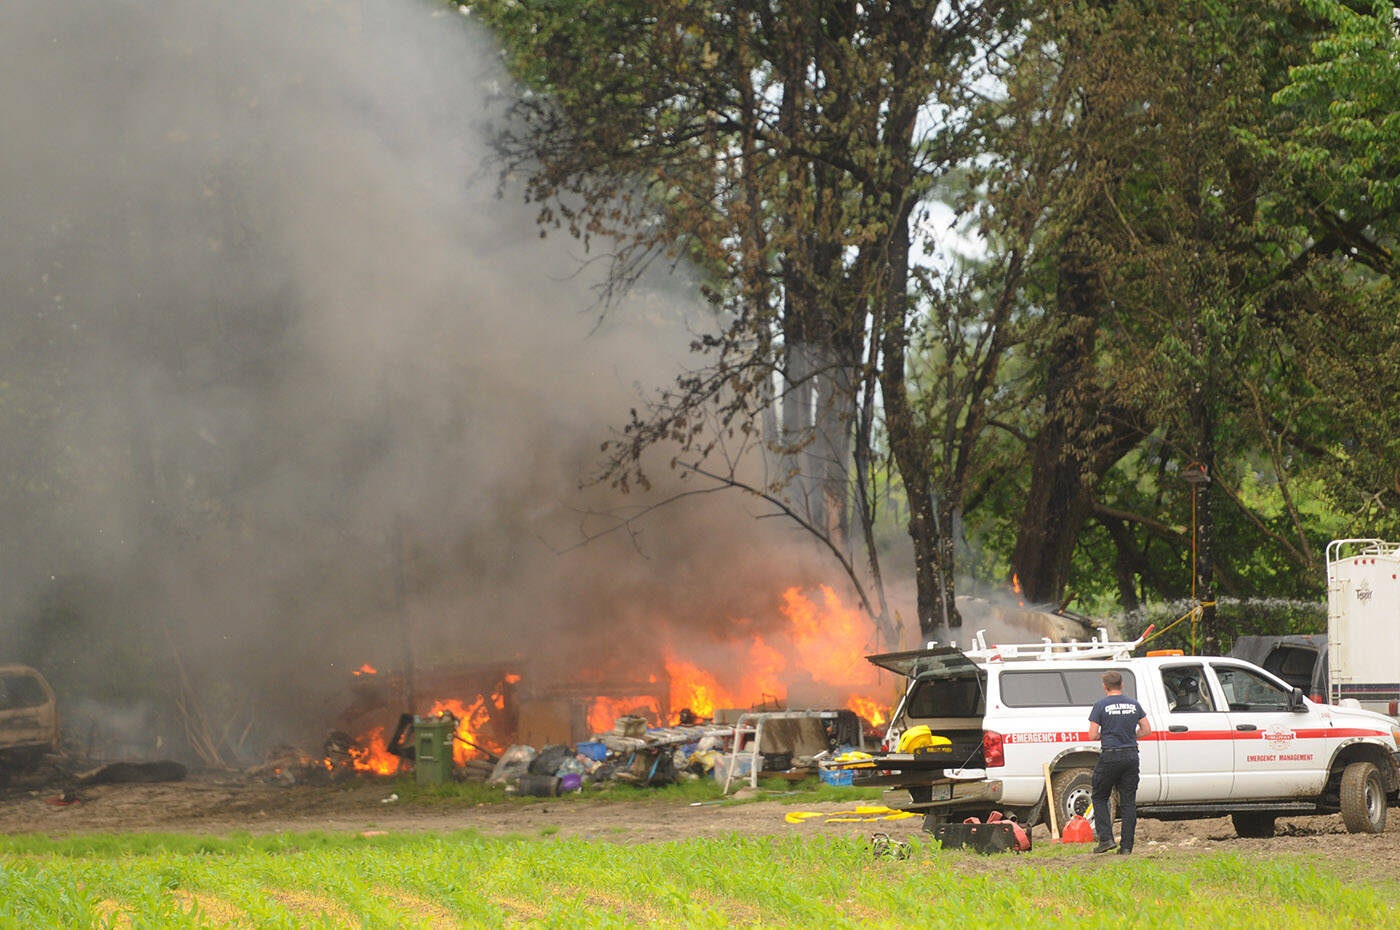 The Chilliwack Fire Department was called to an RV fire on Skwali reserve on Wednesday, June 15, 2022. (Jenna Hauck/ Chilliwack Progress)